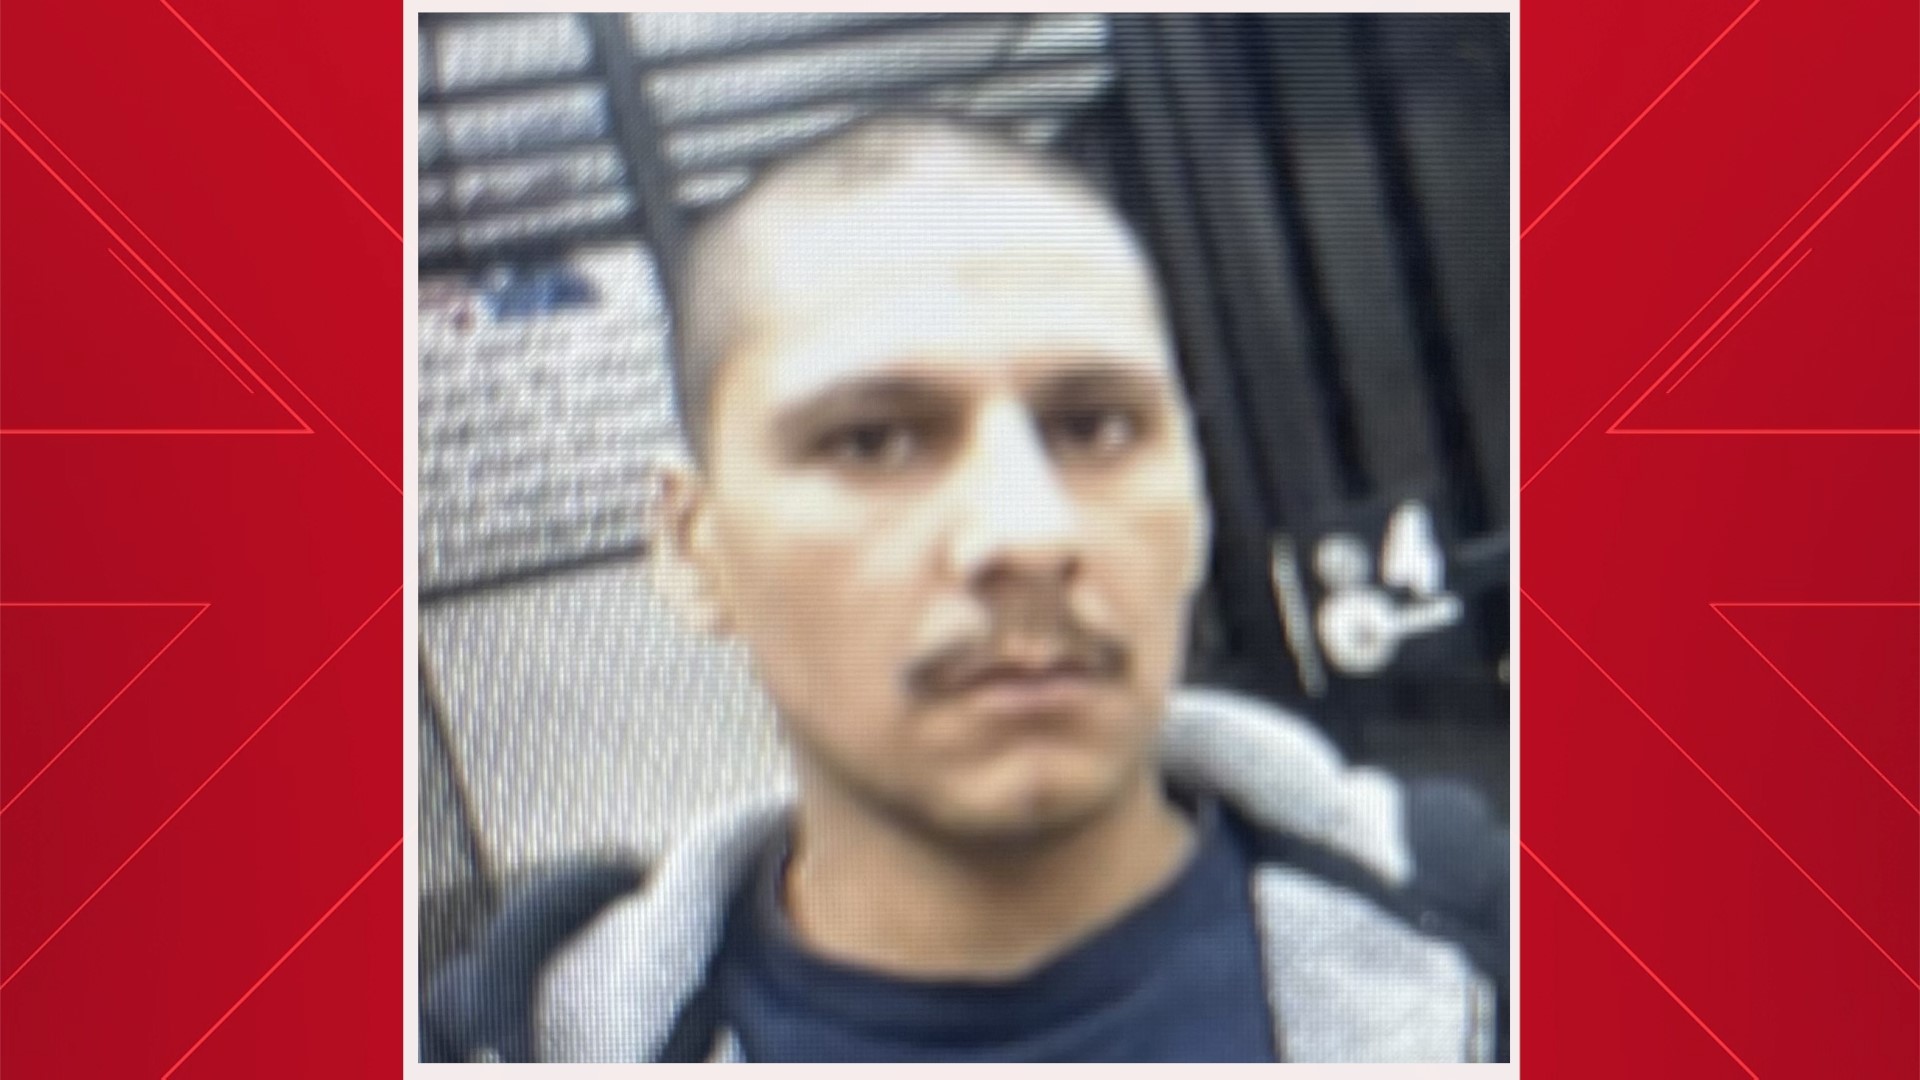 A manhunt for 38-year-old Francisco Oropeza continues. He's accused of killing five people "almost execution-style" after being confronted by neighbors.